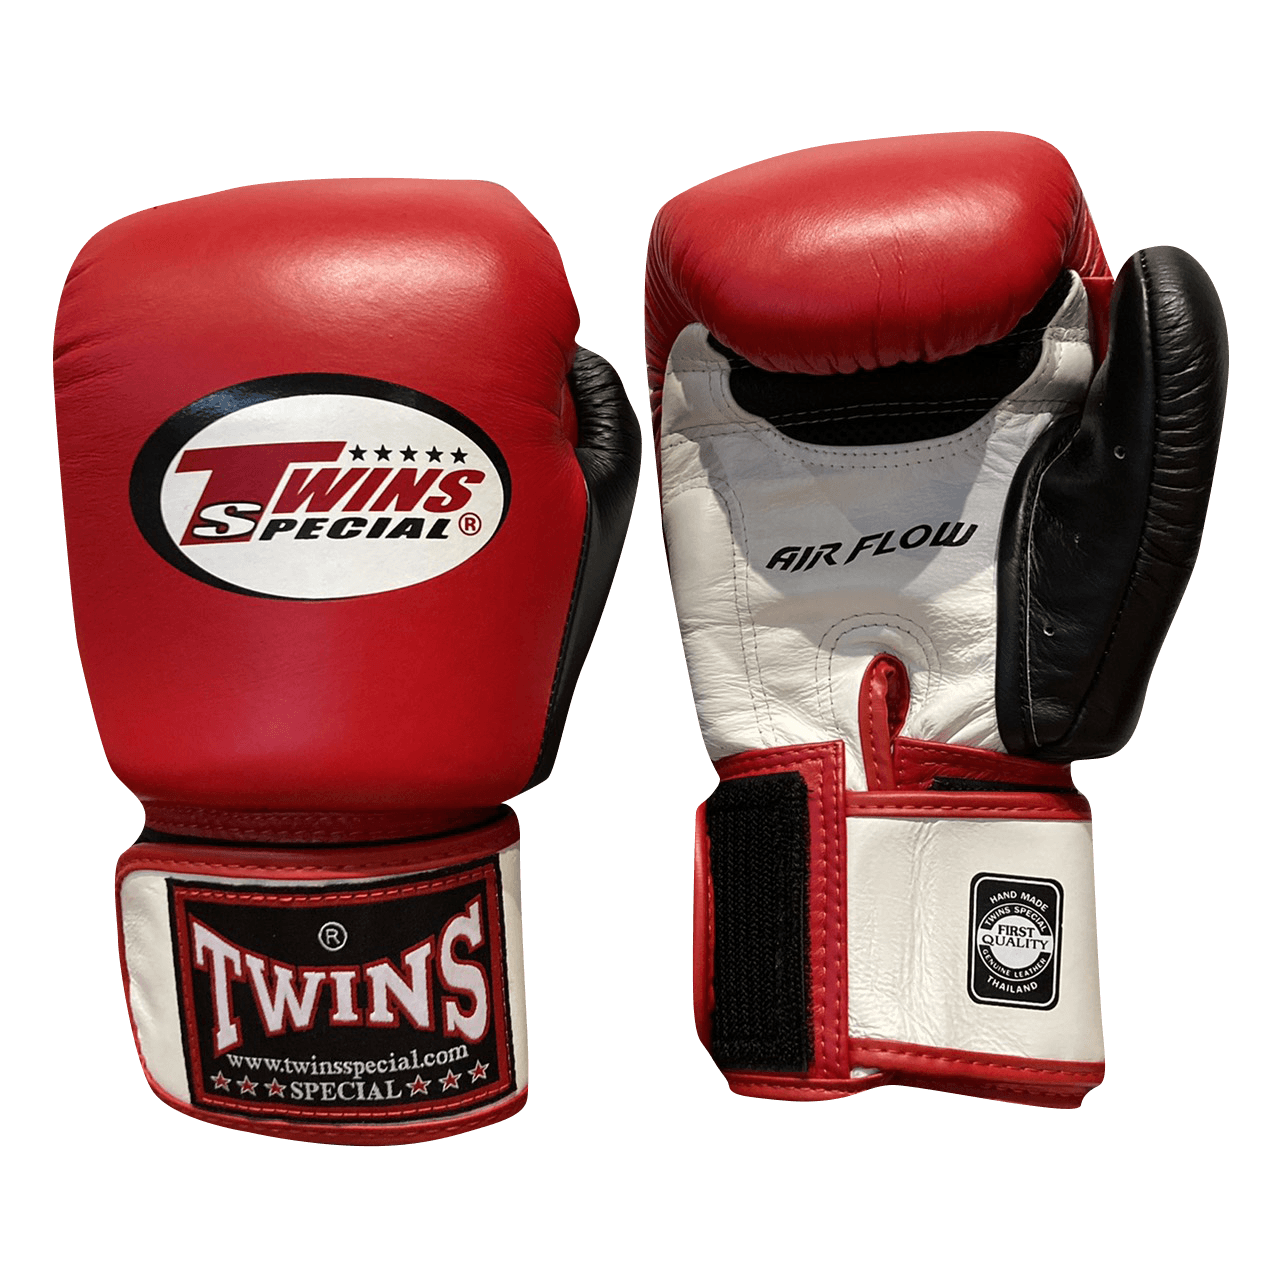 Twins Special Boxing Gloves BGVLA-3T Wh/Rd/Bk/Bk Red Front